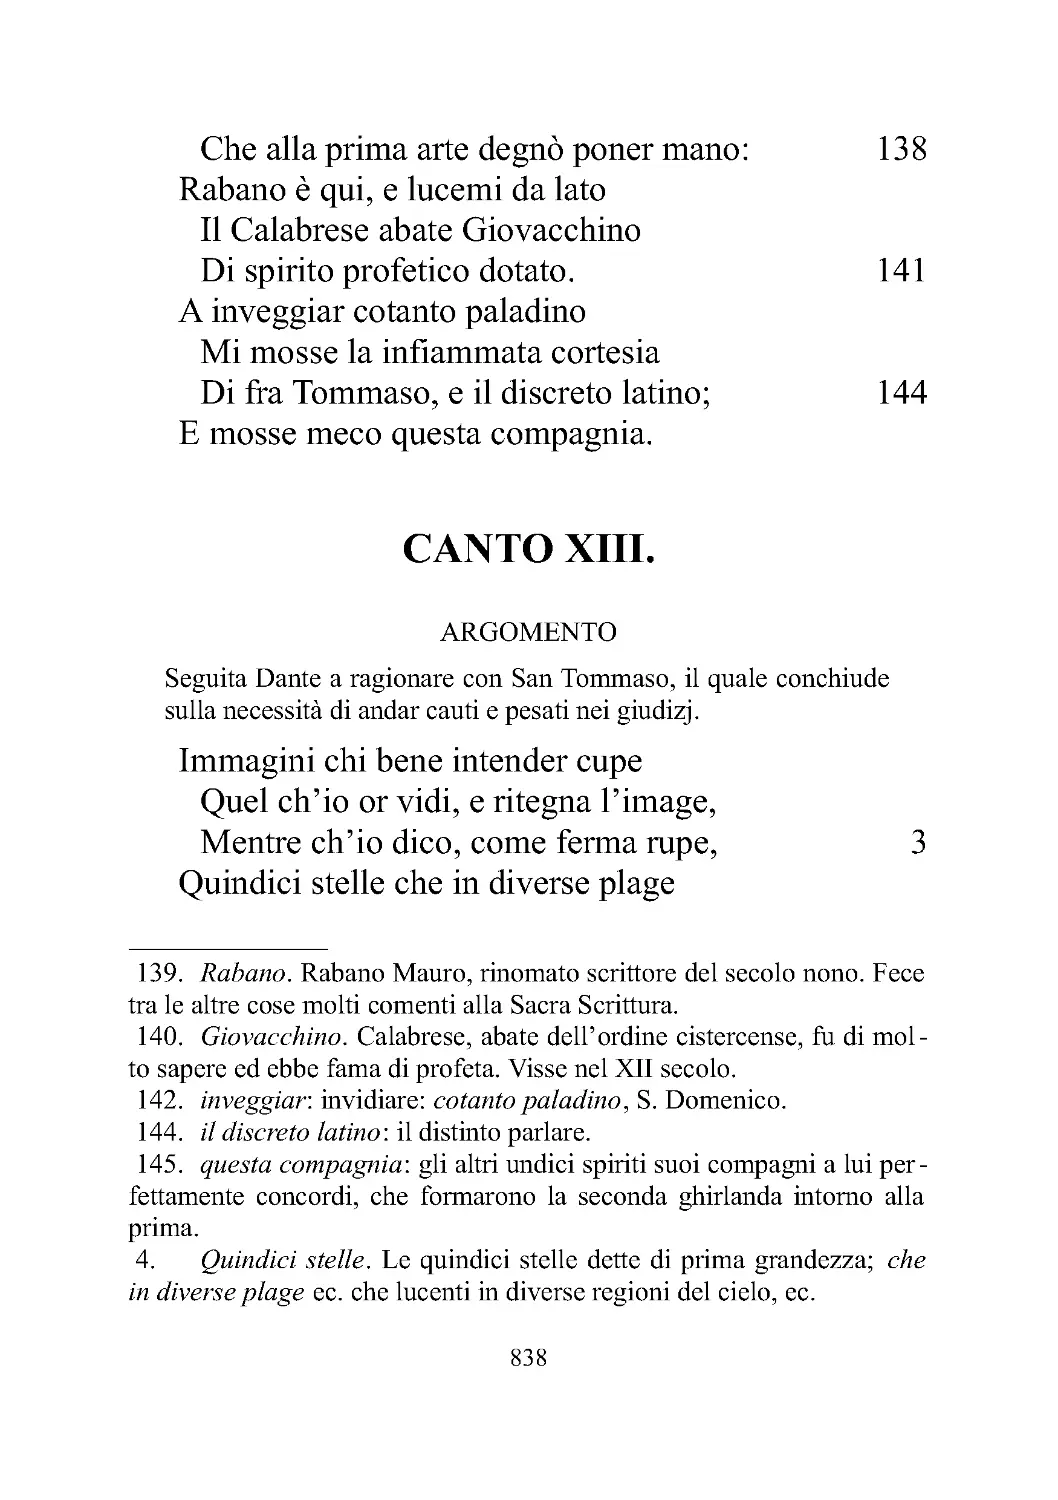 CANTO XIII.